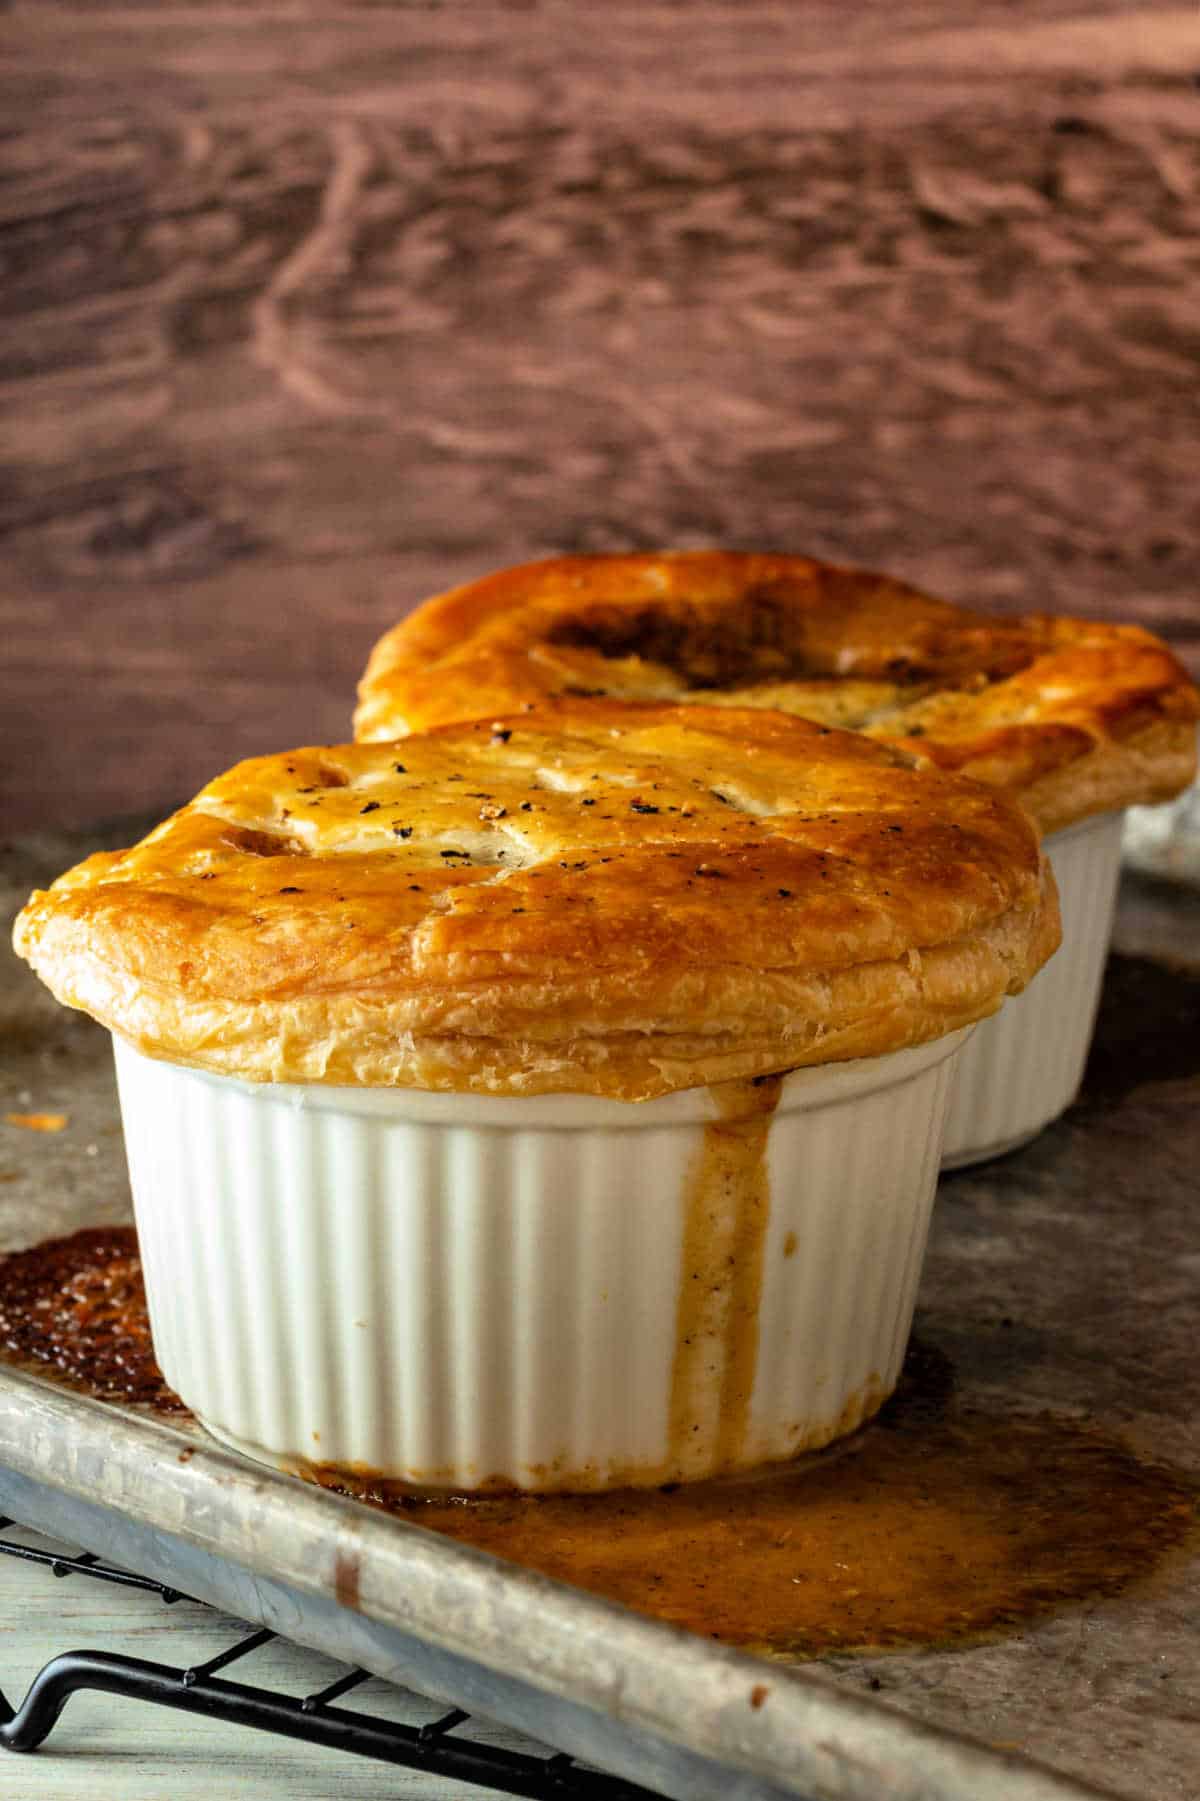 White, puff pastry-topped ramekins cooling on a rack. There is a little bit of gravy running down the side of the ramekin in the front.